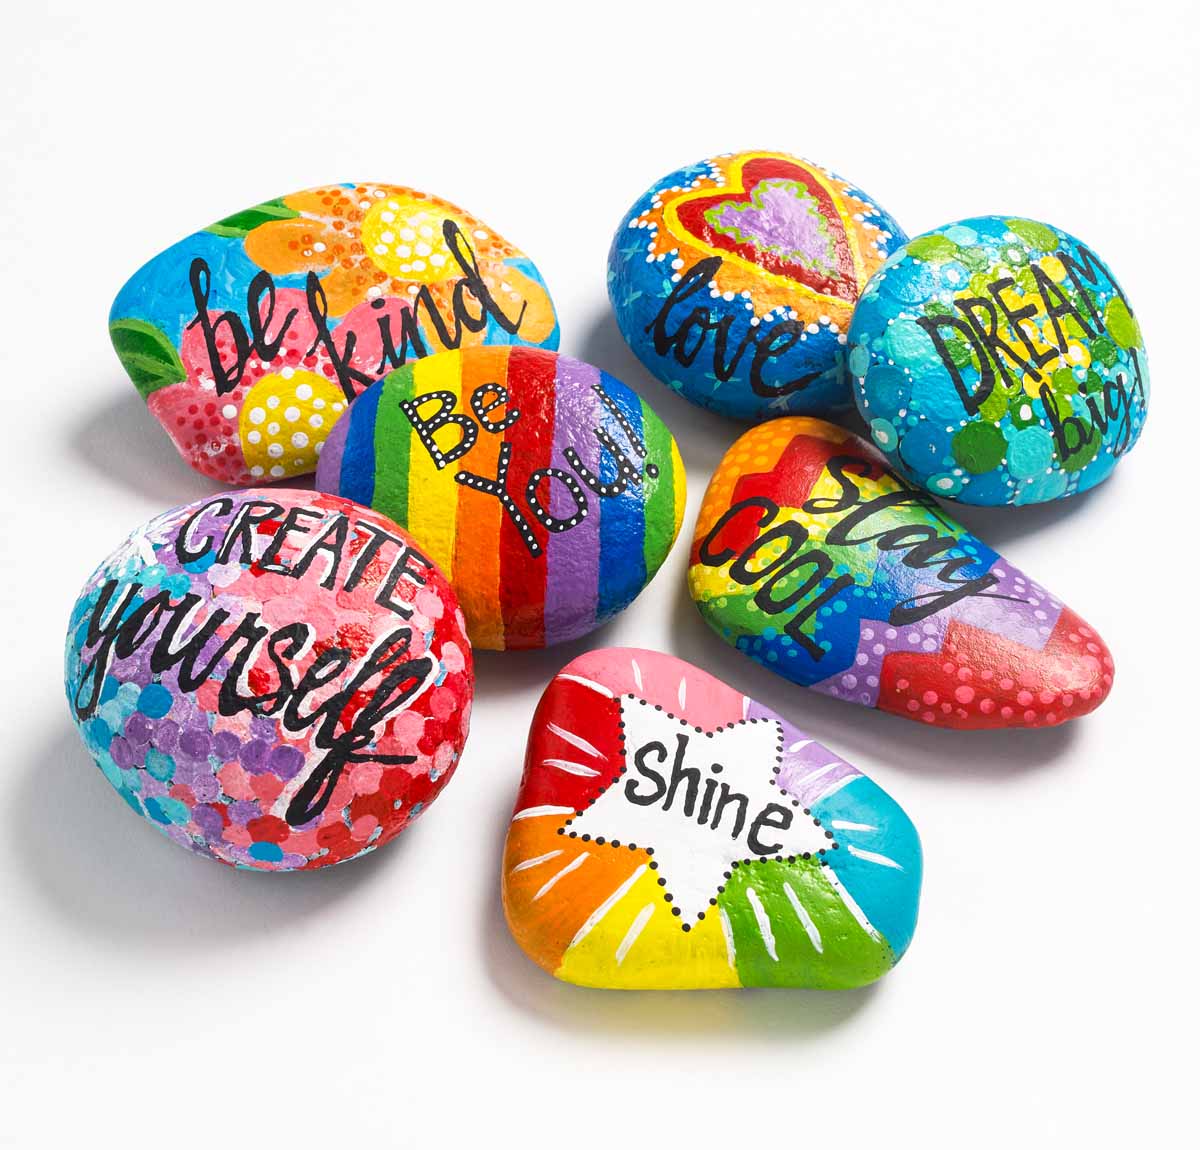 Easy DIY Painted Rocks - Project